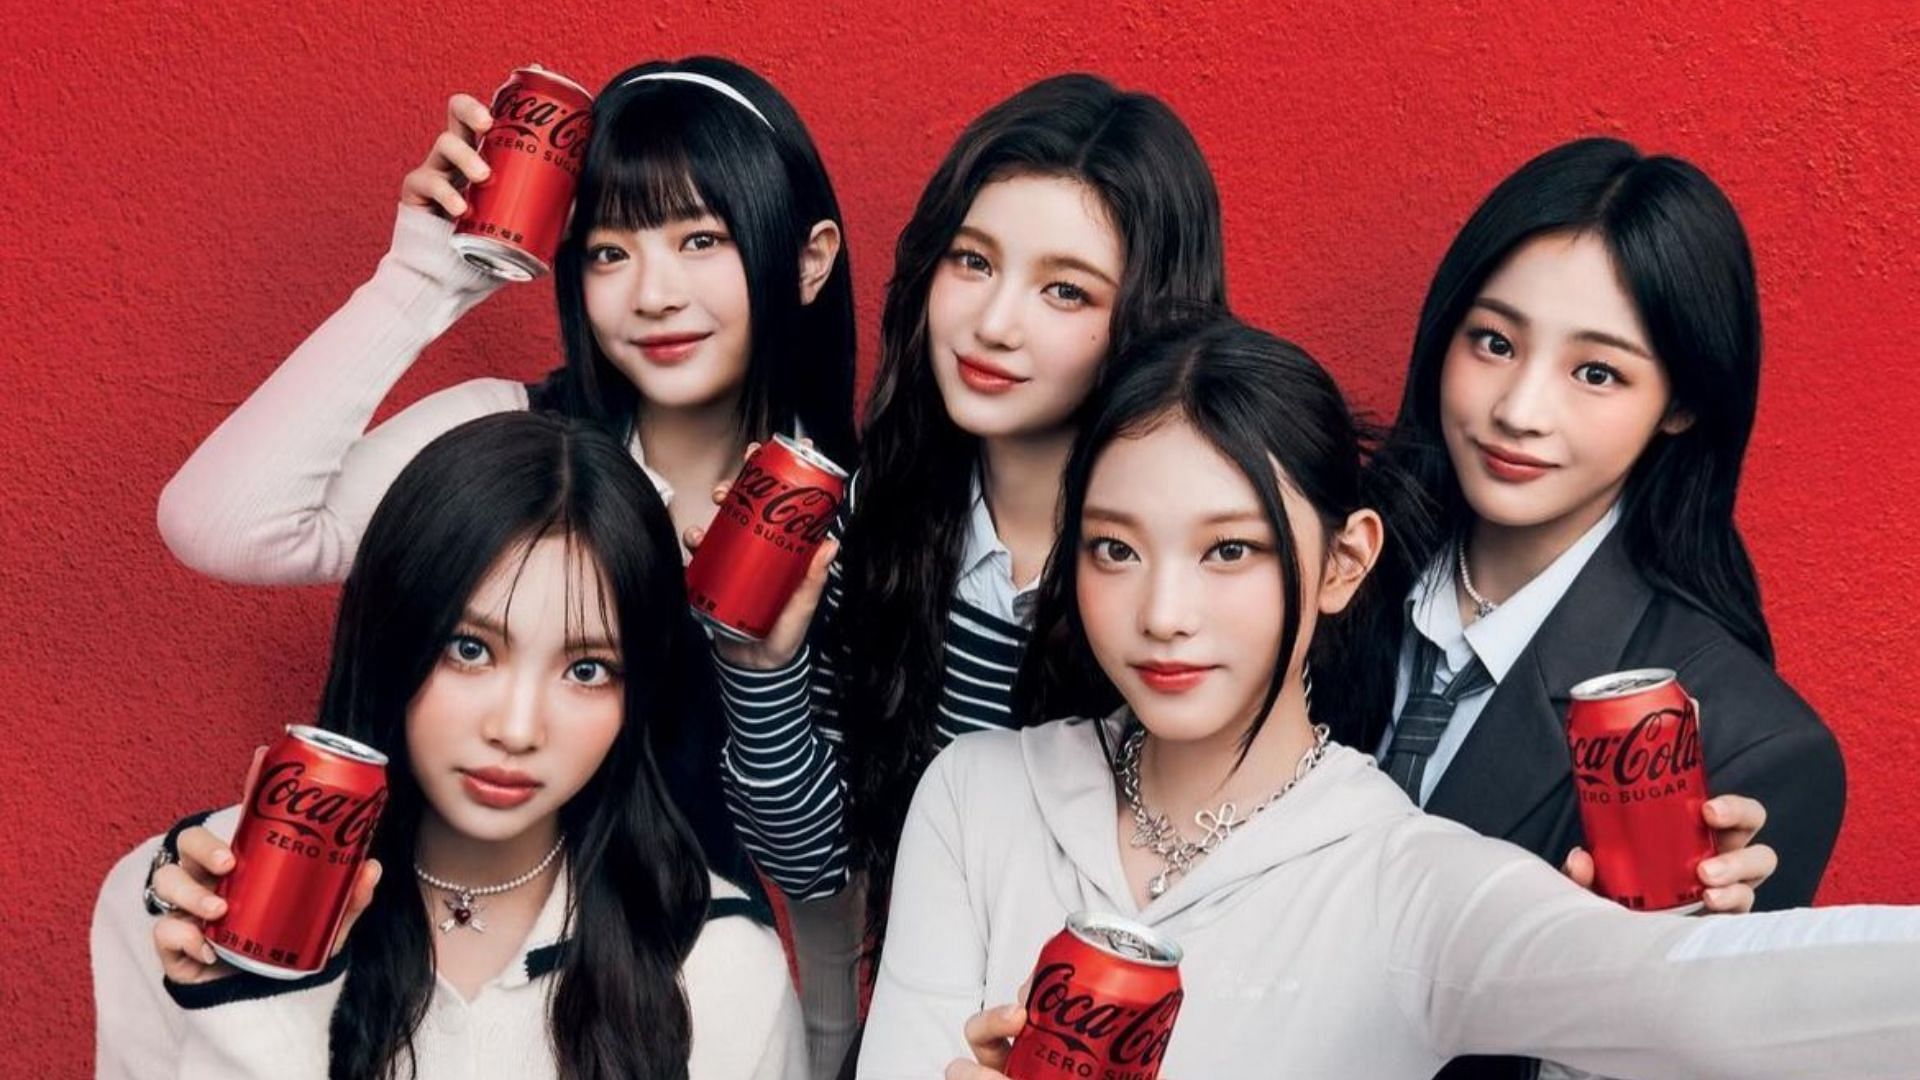 NewJeans and HYBE receive backlash for Coca-Cola endorsement (Image via Instagram/newjeans_official)